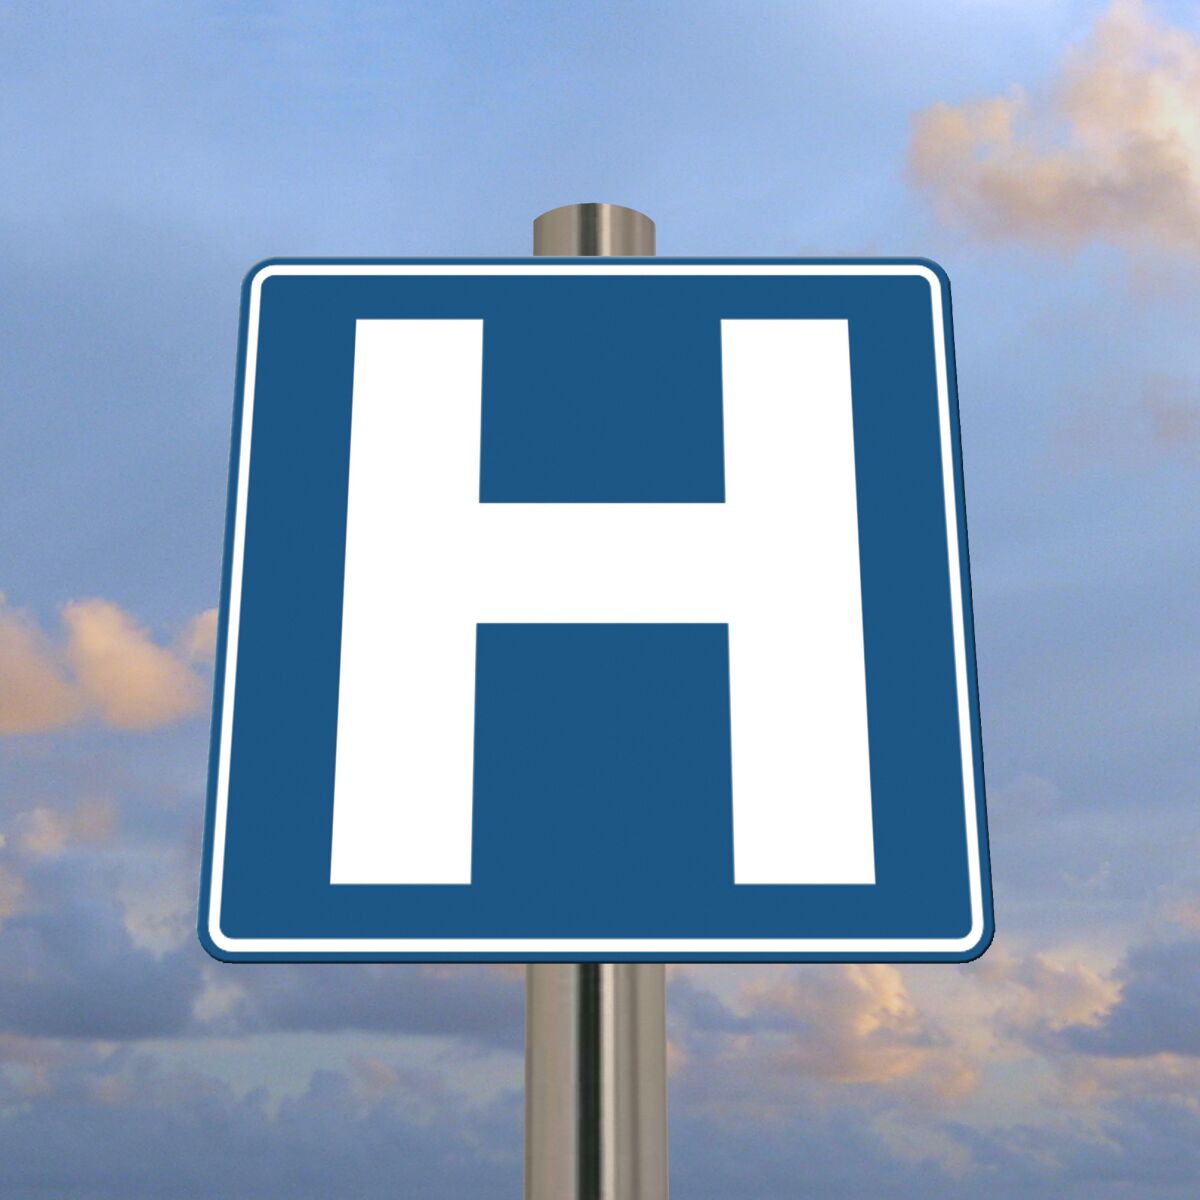 A block H hospital sign against a background of a cloudy sky